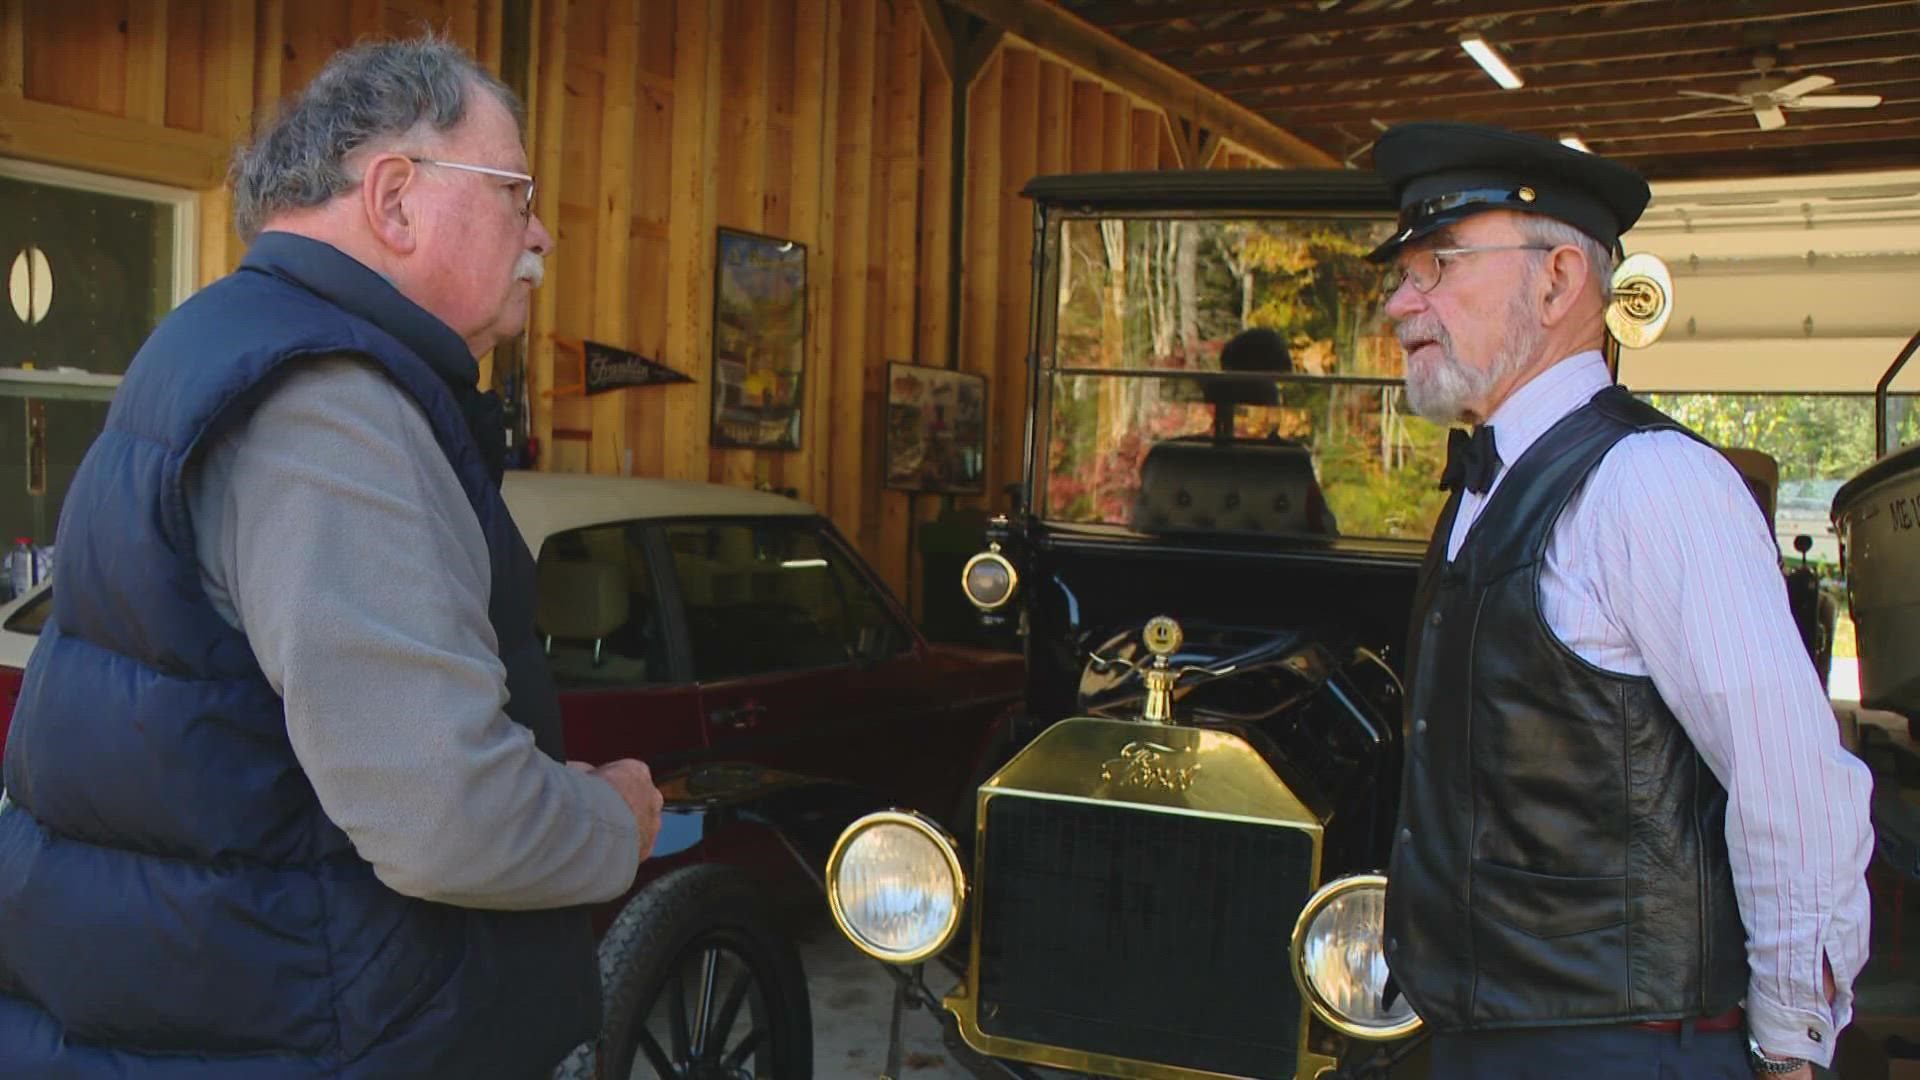 A Maine man has seven Model T’s in this collection, including one of the last ones to ever come off the production line.